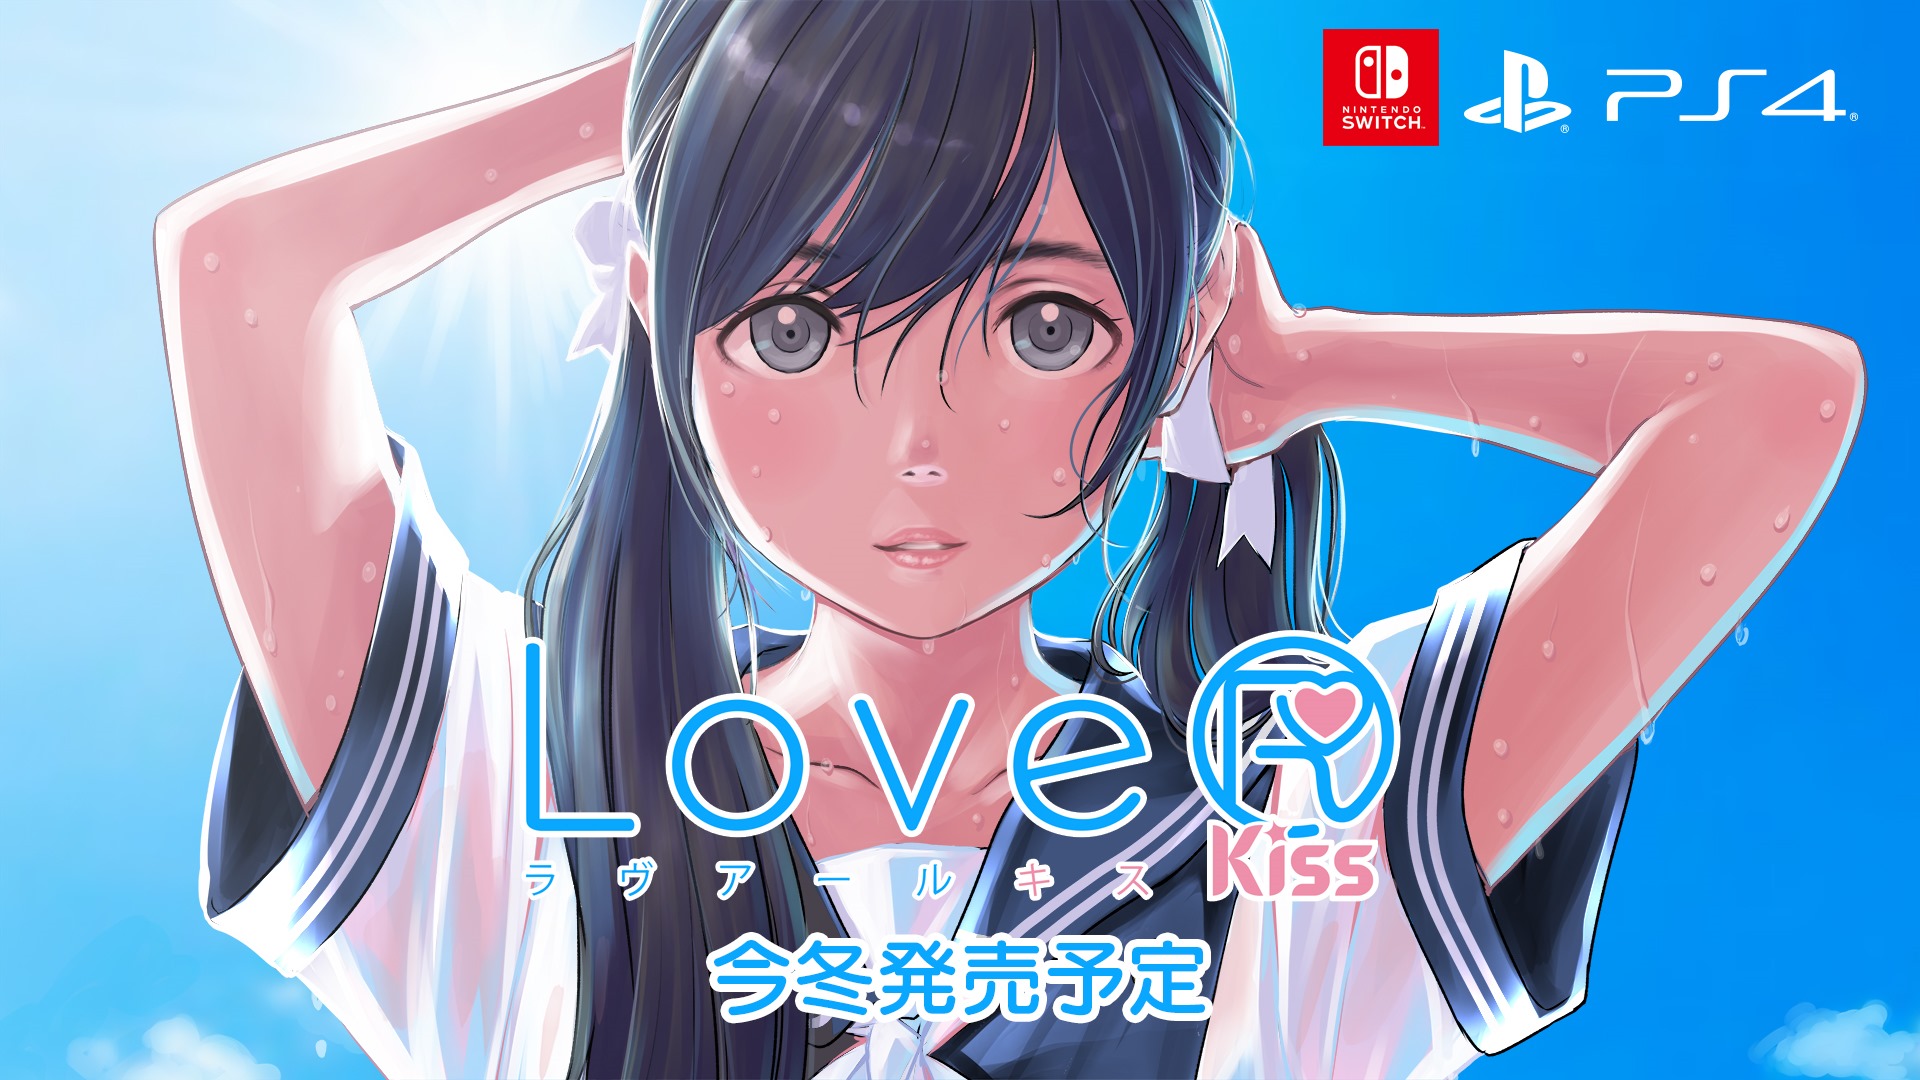 LoveR Makes A Rebound With Updated Rerelease LoveR Kiss - Siliconera